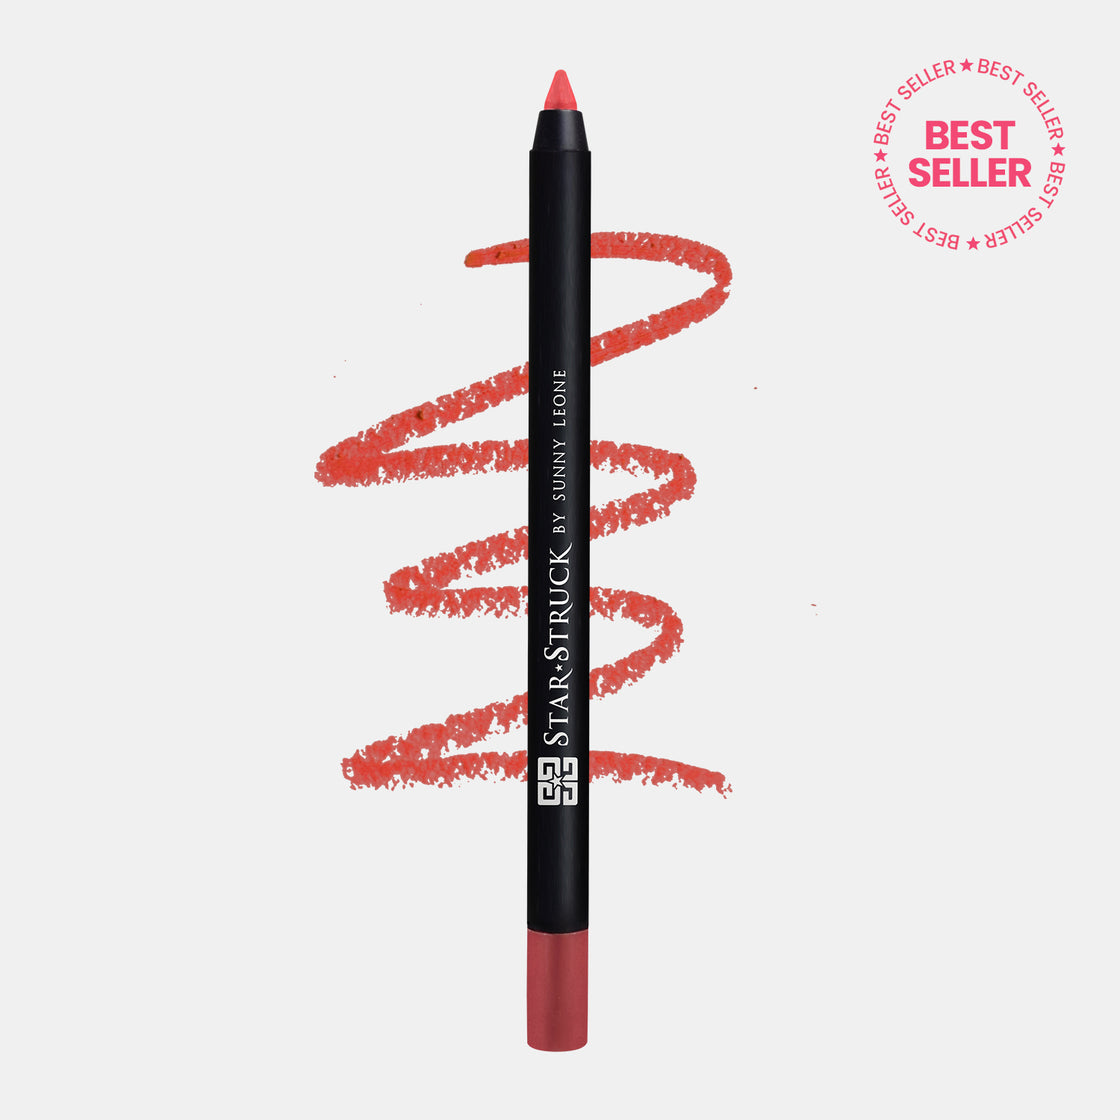 Coralicious - Long Wear Lip Liner, Coral Pink | 1.2gms